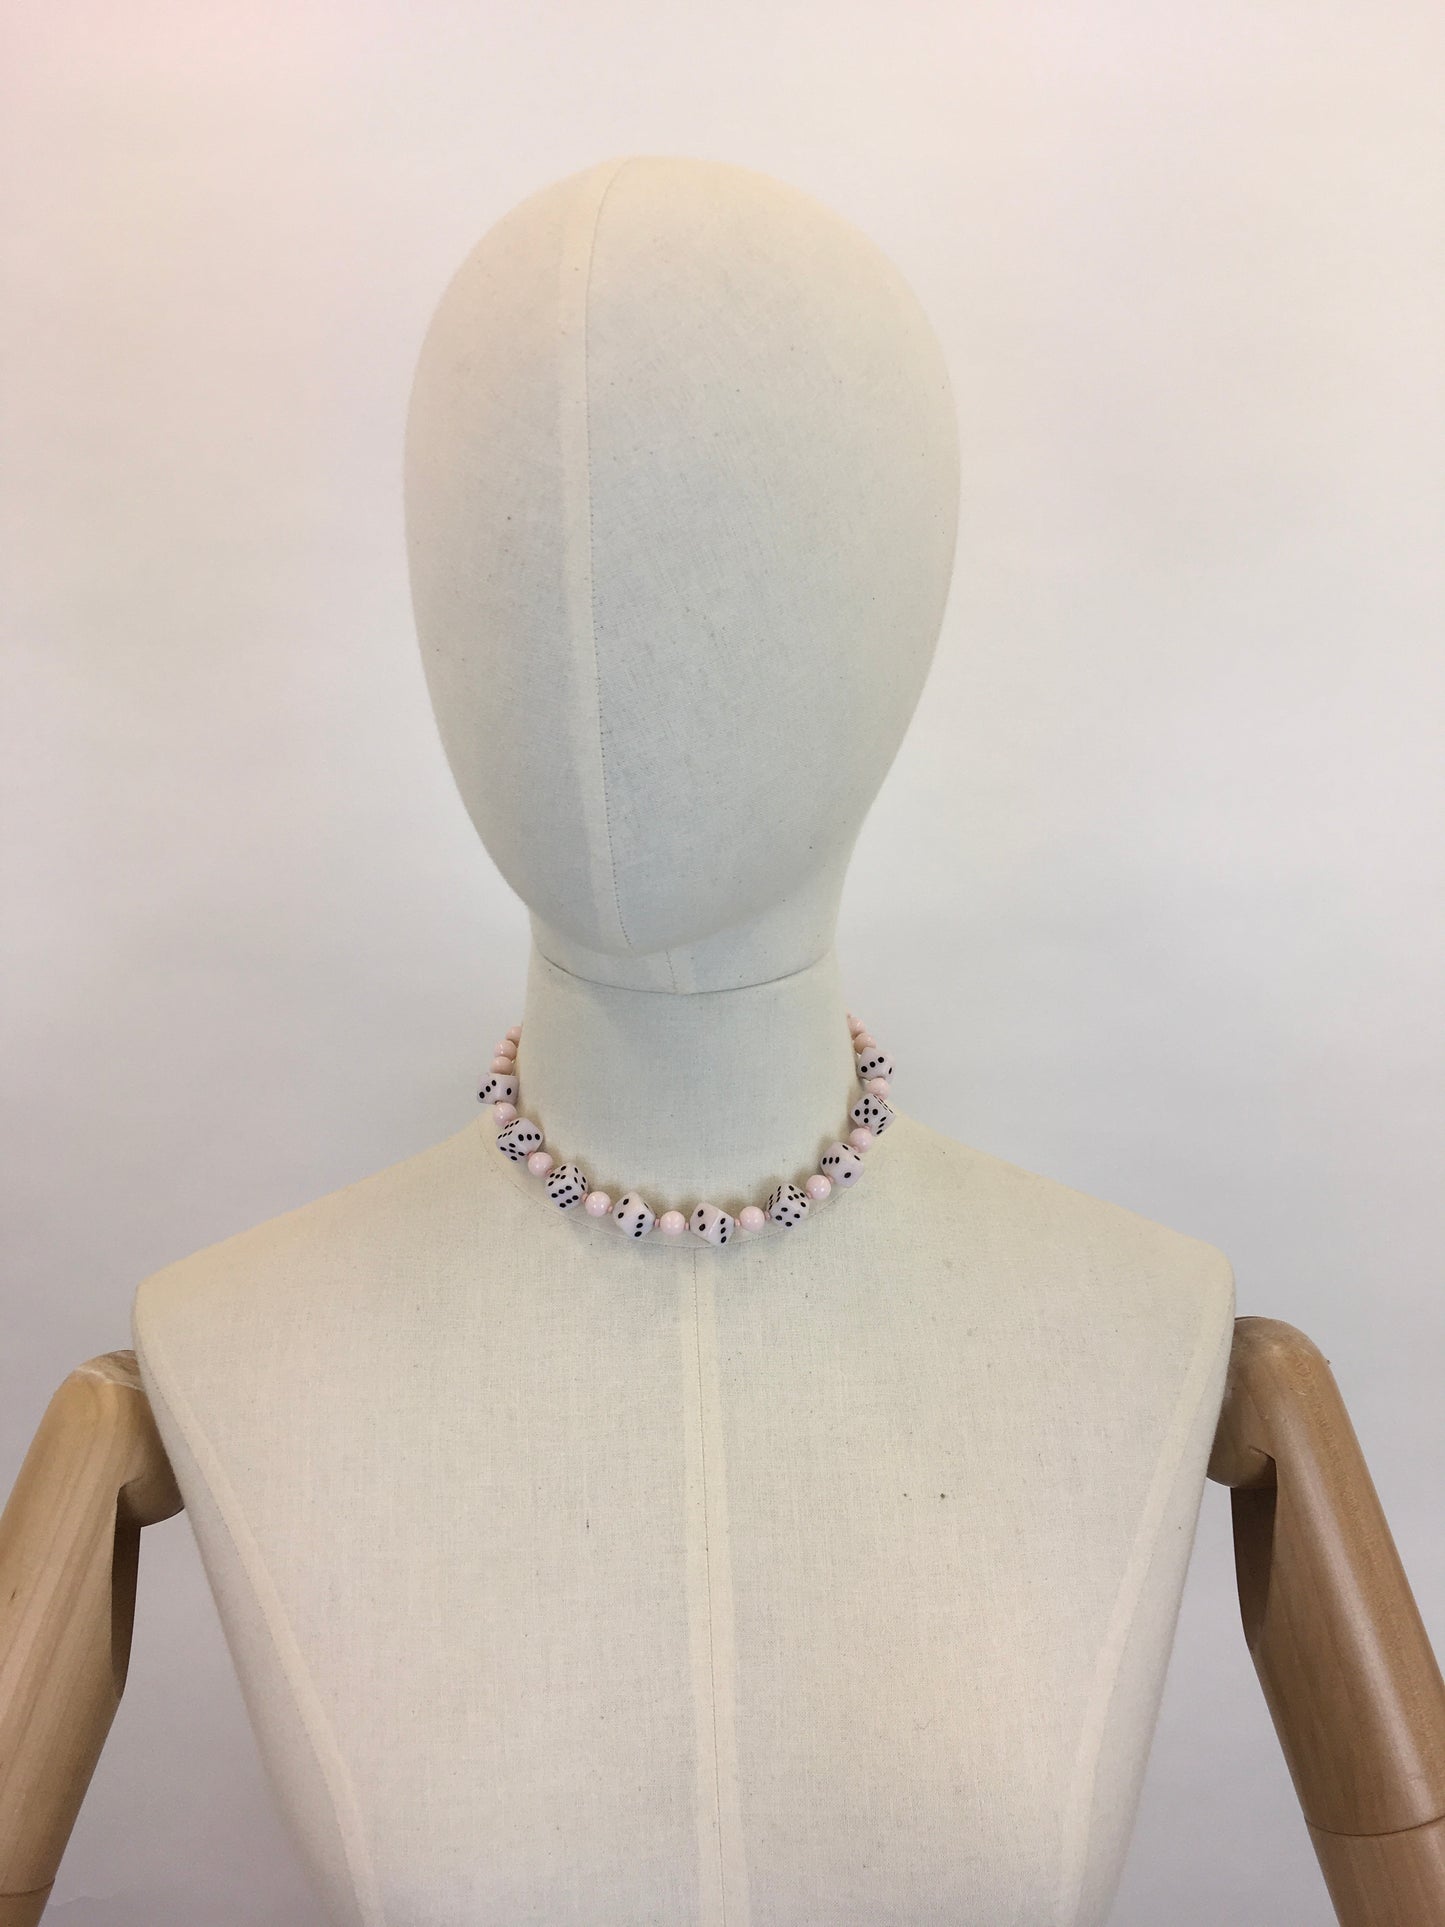 Original 1950s Pale Pink Novelty Dice Necklace - Made From Milk Bottle Glass